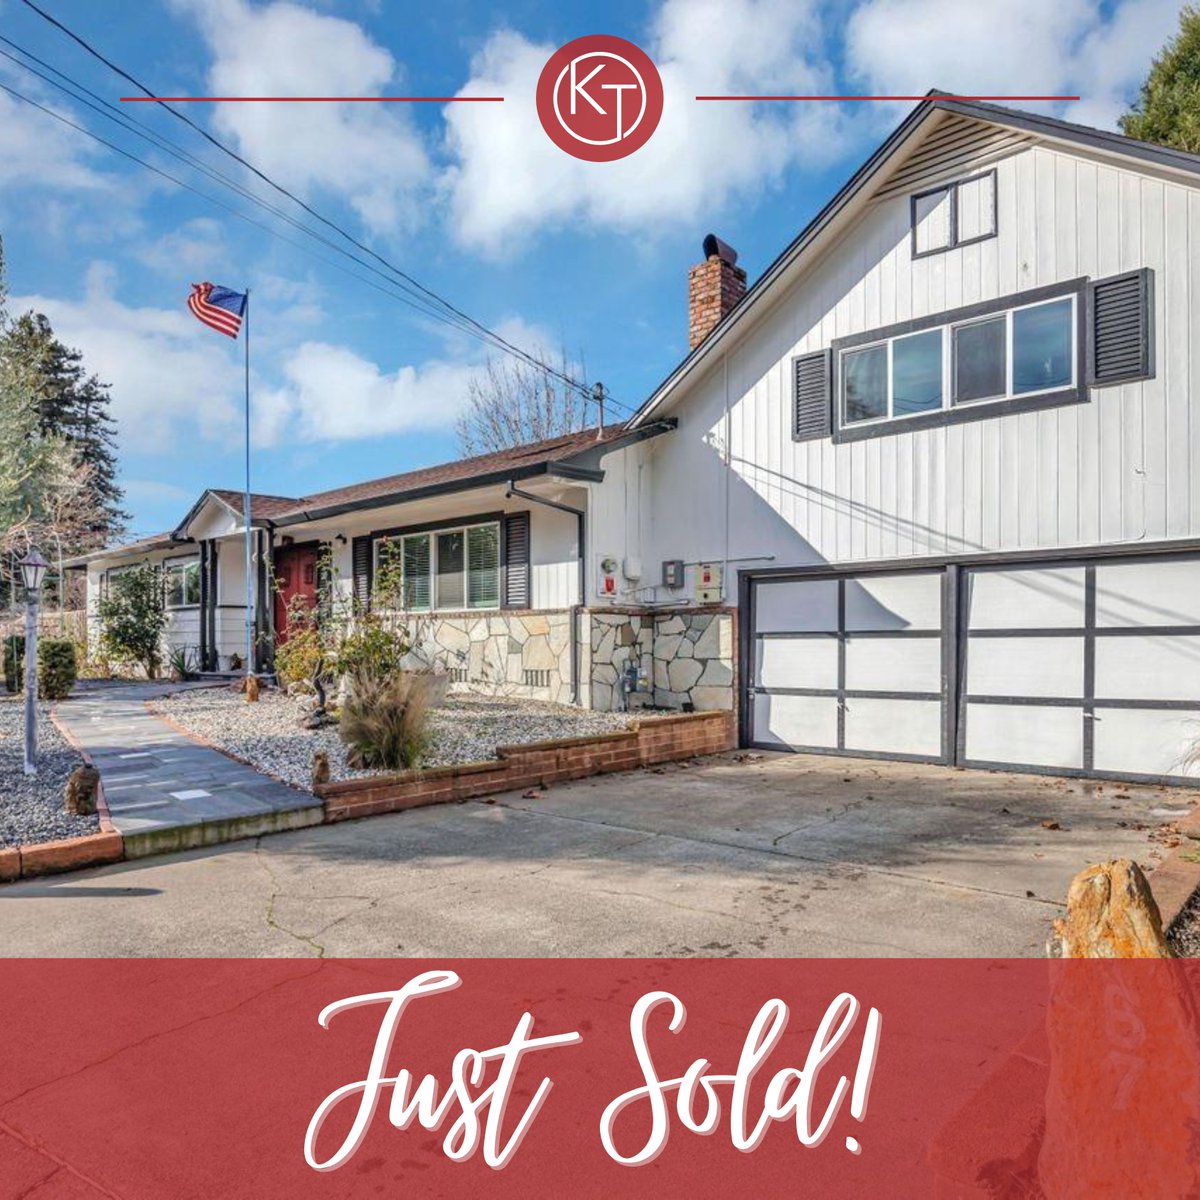 #justsold #realestate #familyhome #coldwellbanker #realtor #home #closedearly #santarosa #sonomacountyhomes #lovewhatyoudo #hardwork #sold #closed #homesweethome #cbproud #winecountryhomes